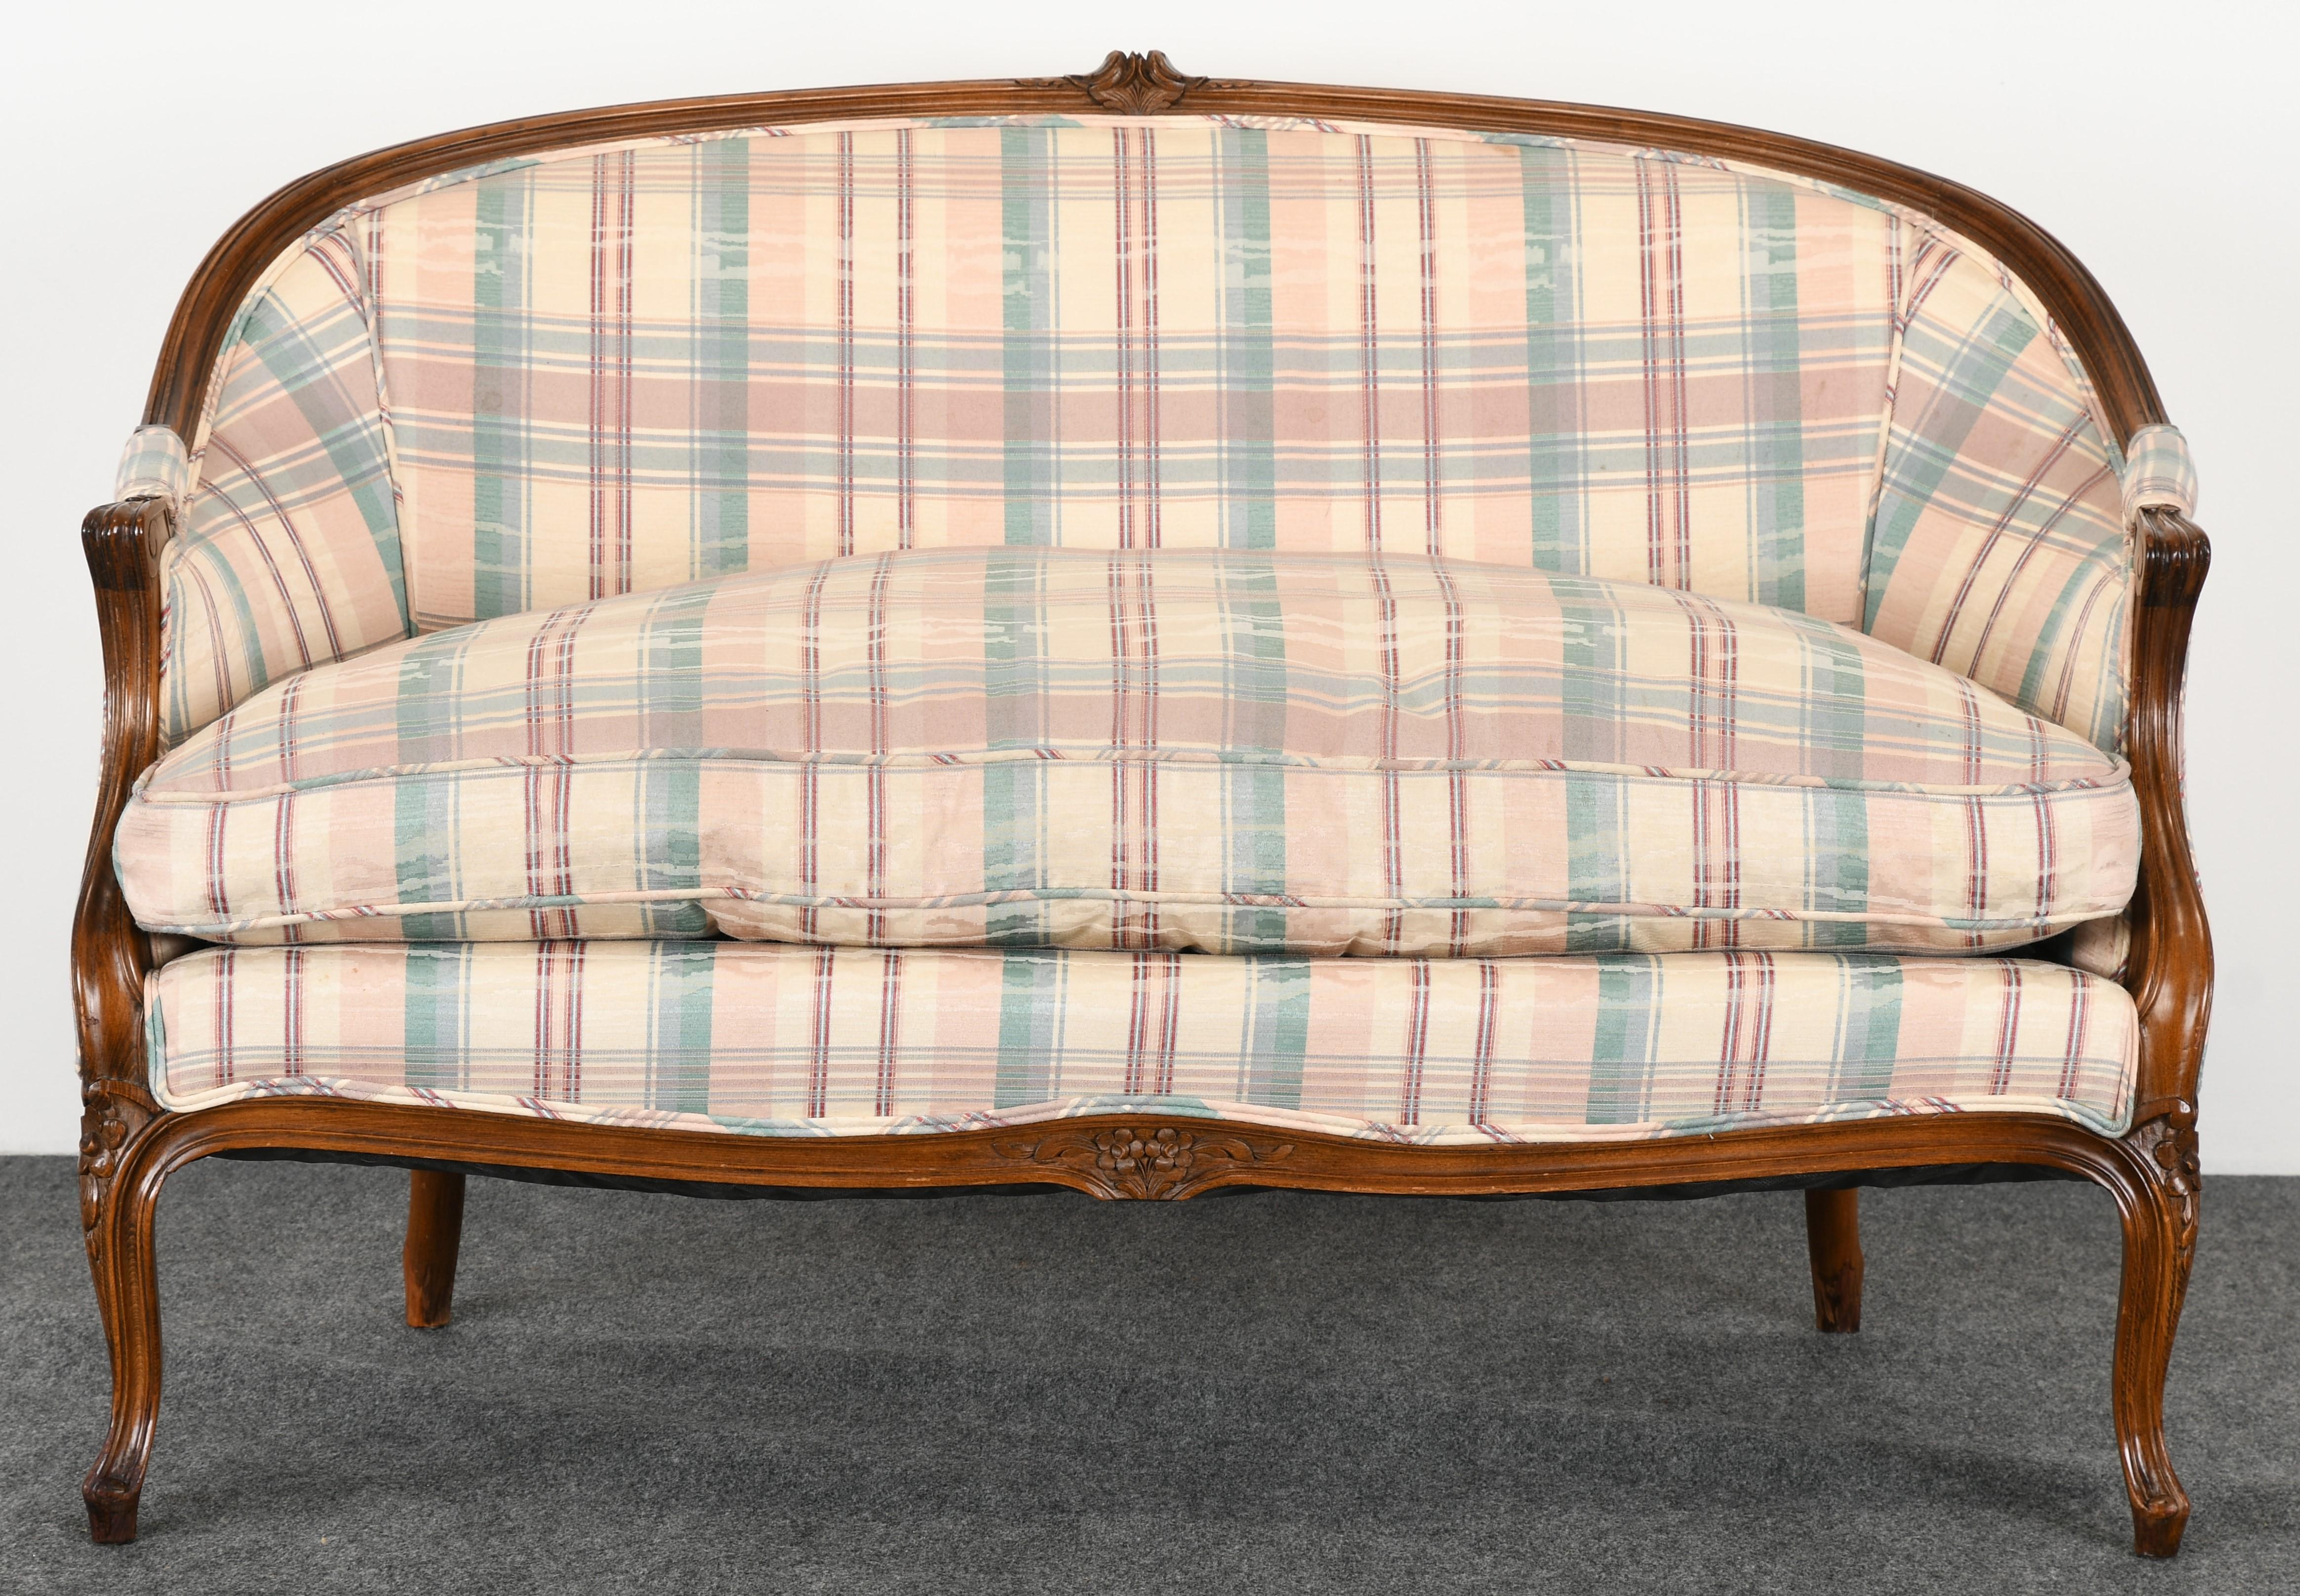 French Louis XV style settee or loveseat made of beechwood with upholstery. The frame is structurally sound and has a beautiful patina to the wood. Very nice carvings and accents. New upholstery is necessary.

Dimensions: 34